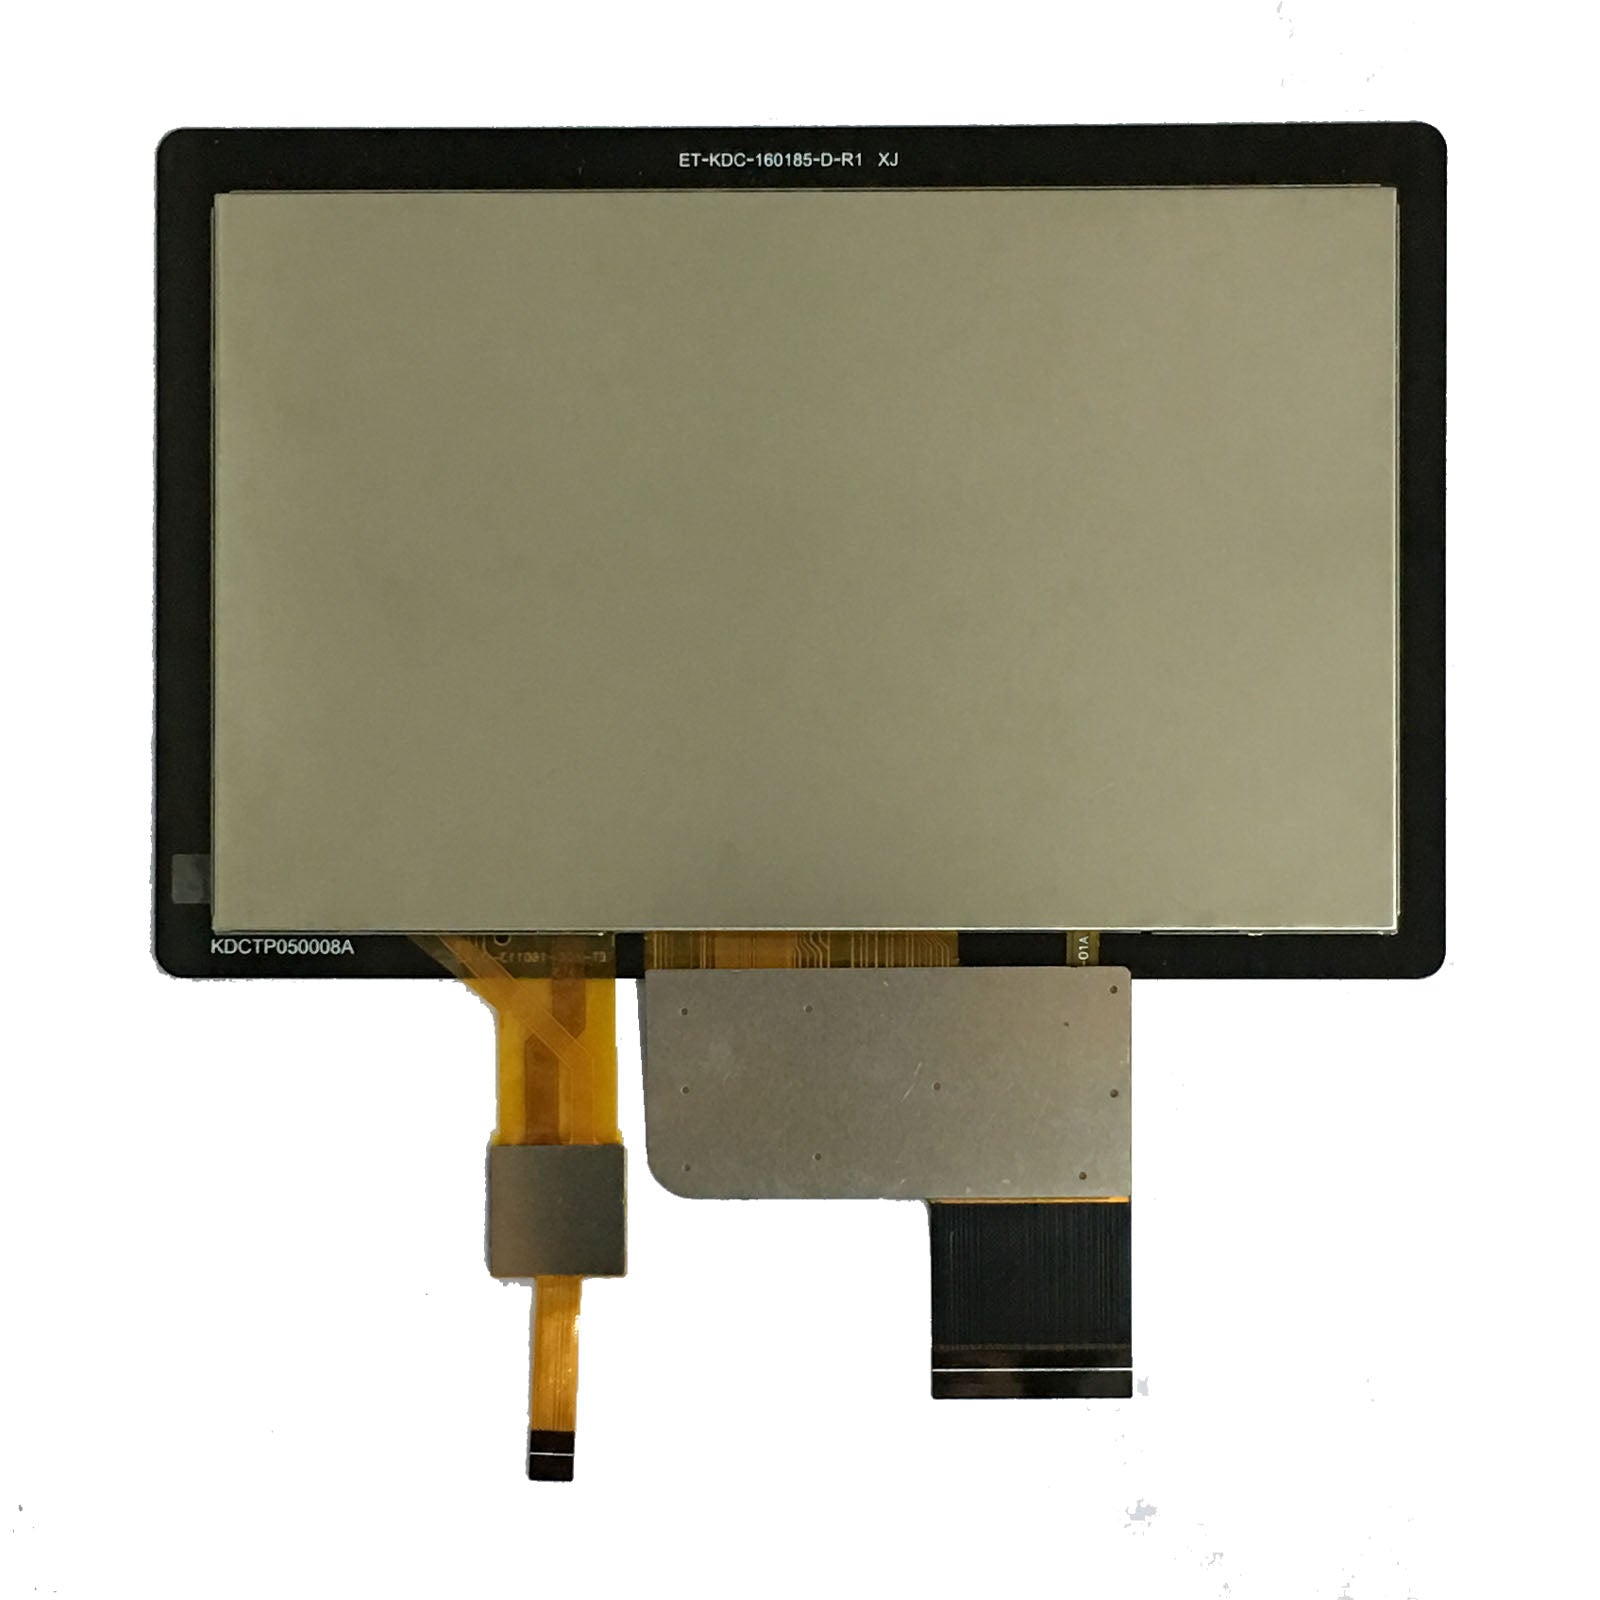 DisplayModule 5.0" IPS 800x480 Display Panel With Capacitive Touch - LVDS